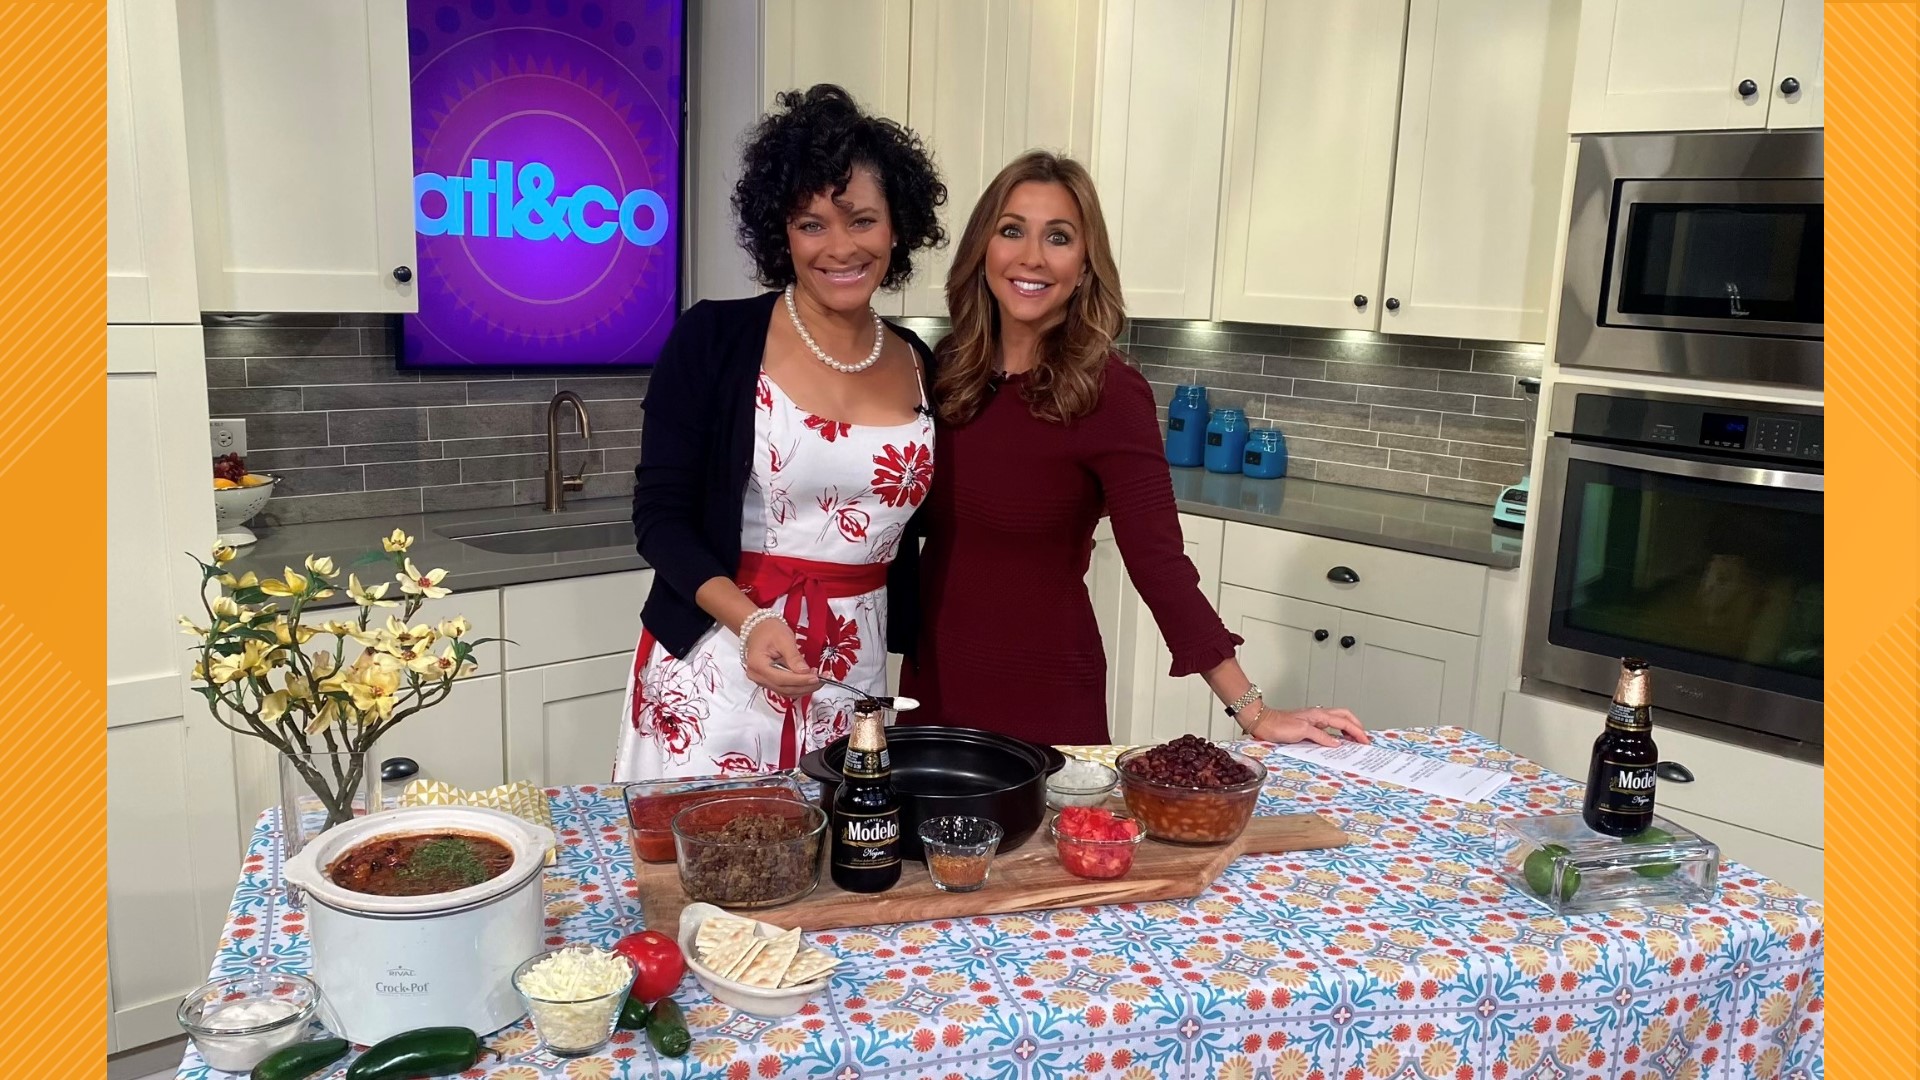 Chef Mali Wilson whips up a tasty Modelo Beer Chili and promotes tonight's star-studded BET Hip Hop Awards.